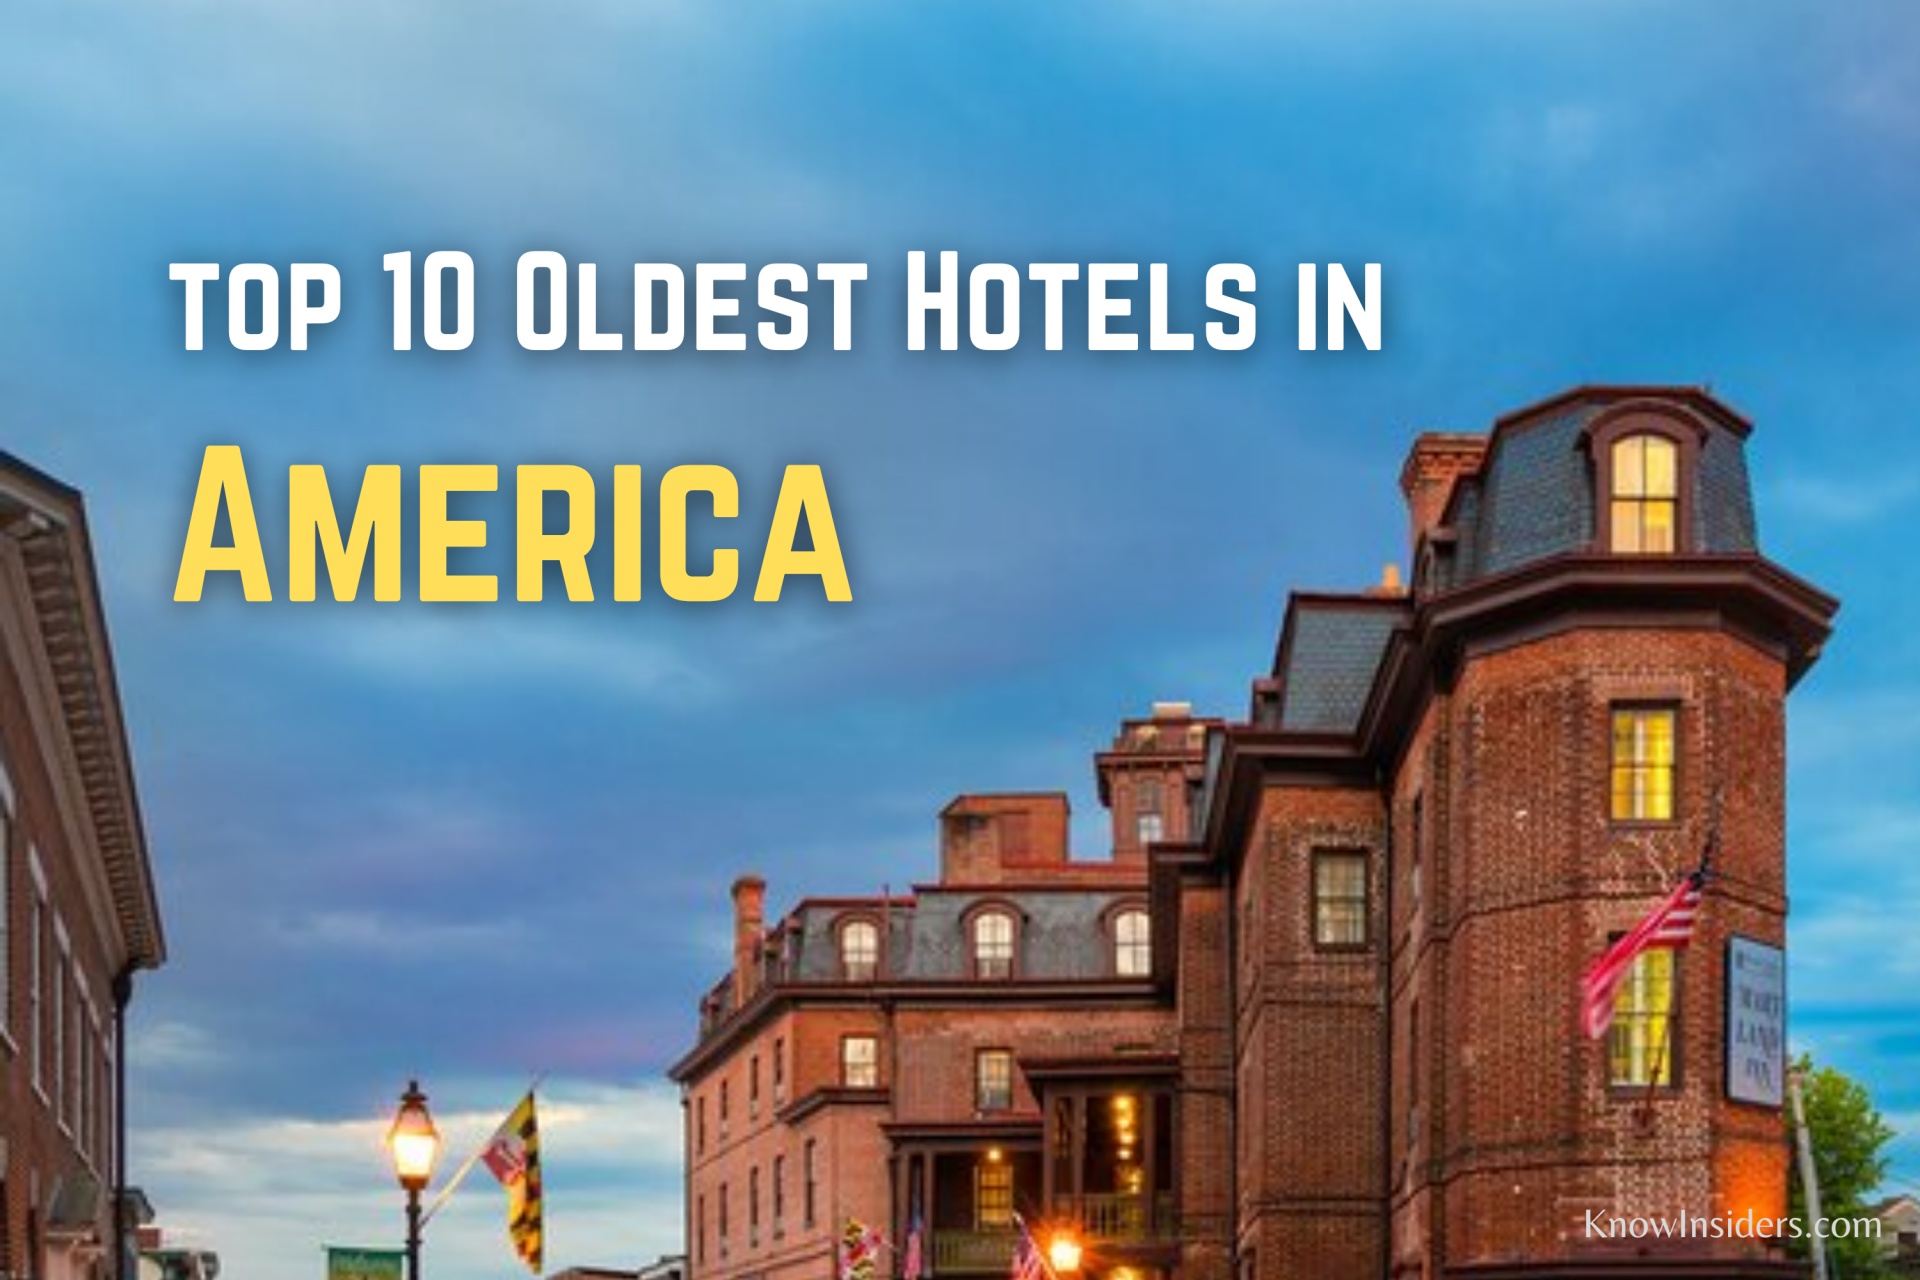 10 Oldest Hotels in the US - Top Historic Attractions